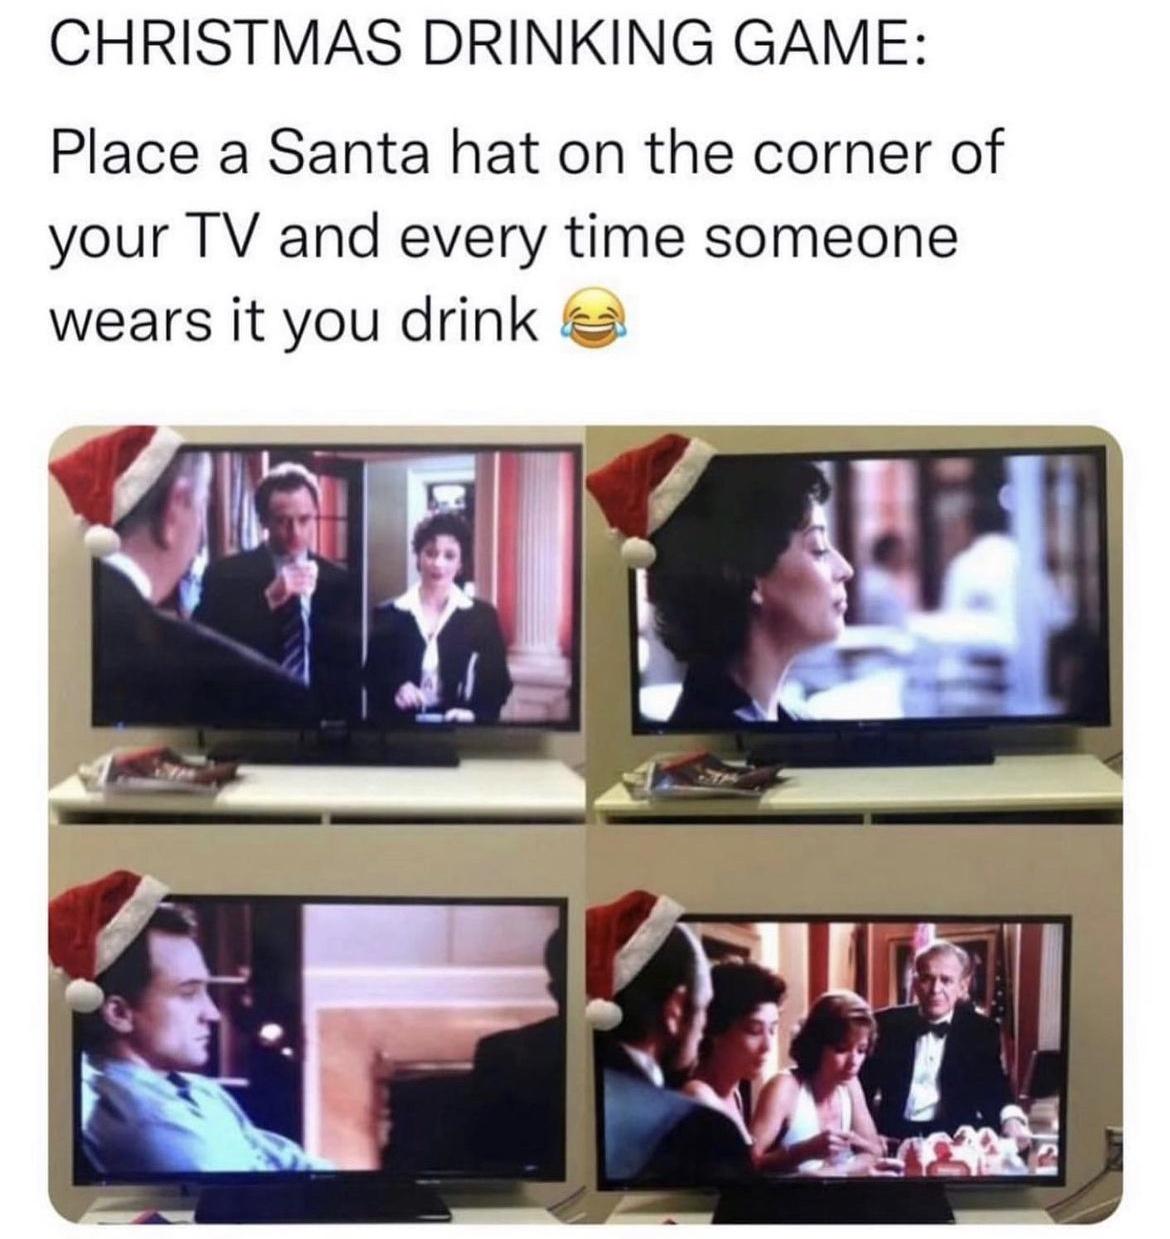 fresh memes - christmas hat drinking game - Christmas Drinking Game Place a Santa hat on the corner of your Tv and every time someone wears it you drink mal